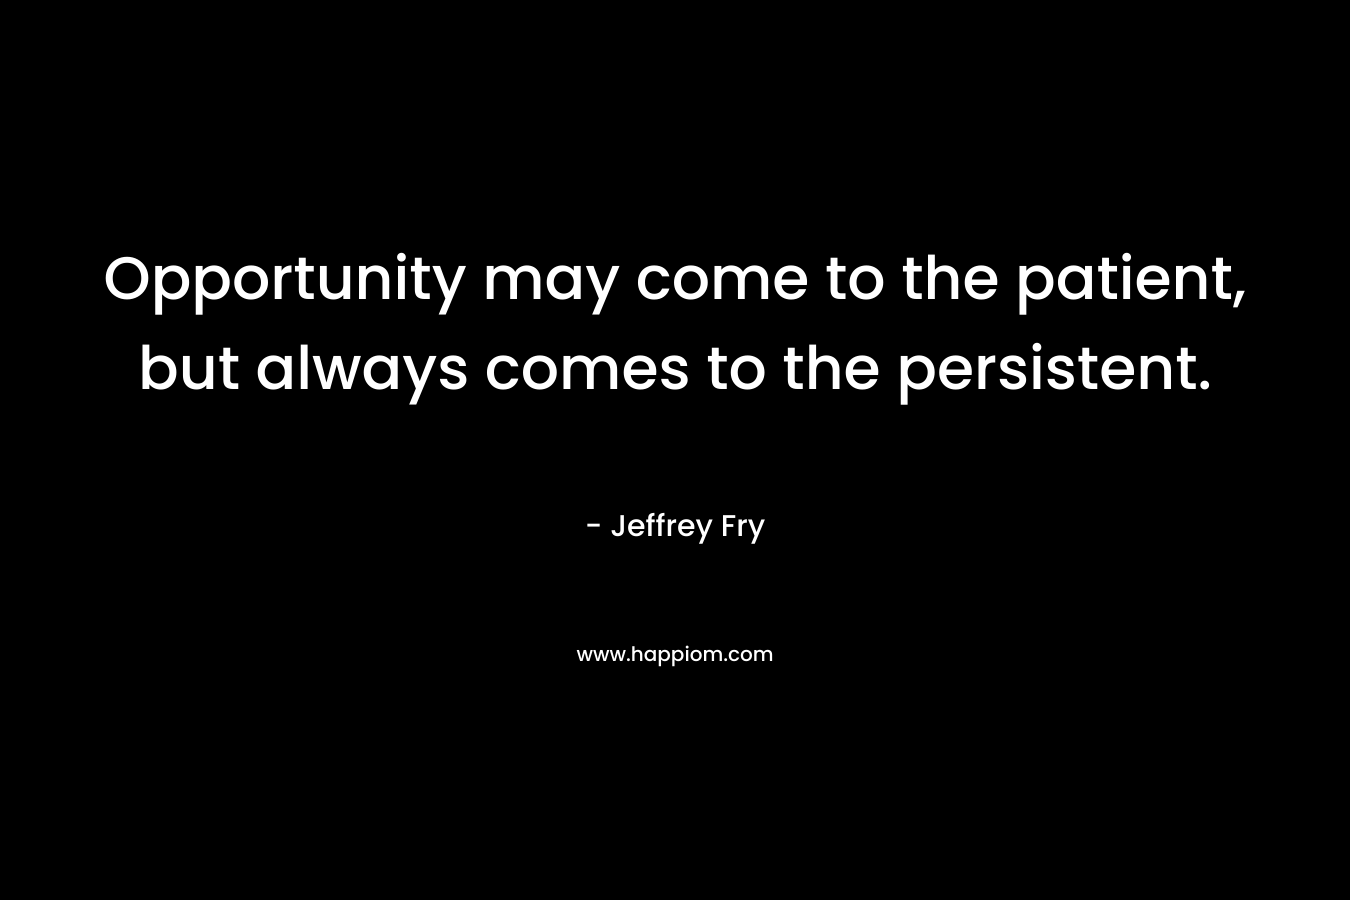 Opportunity may come to the patient, but always comes to the persistent.